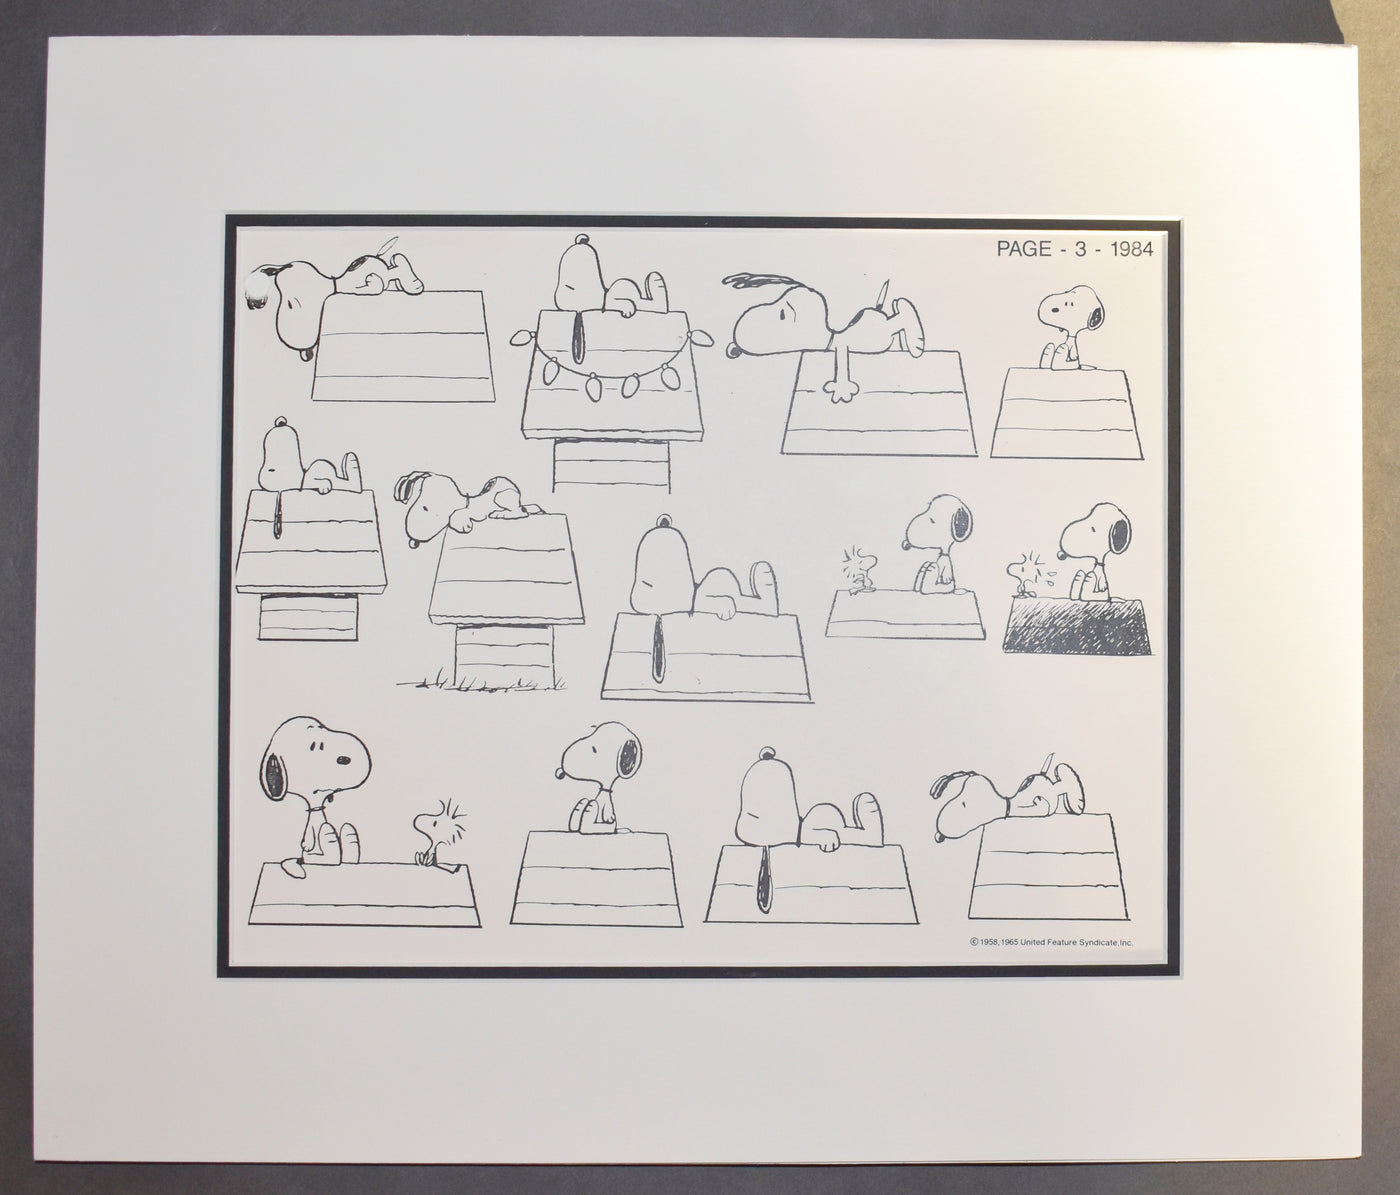 Peanuts Reproduction Model Sheet of Snoopy